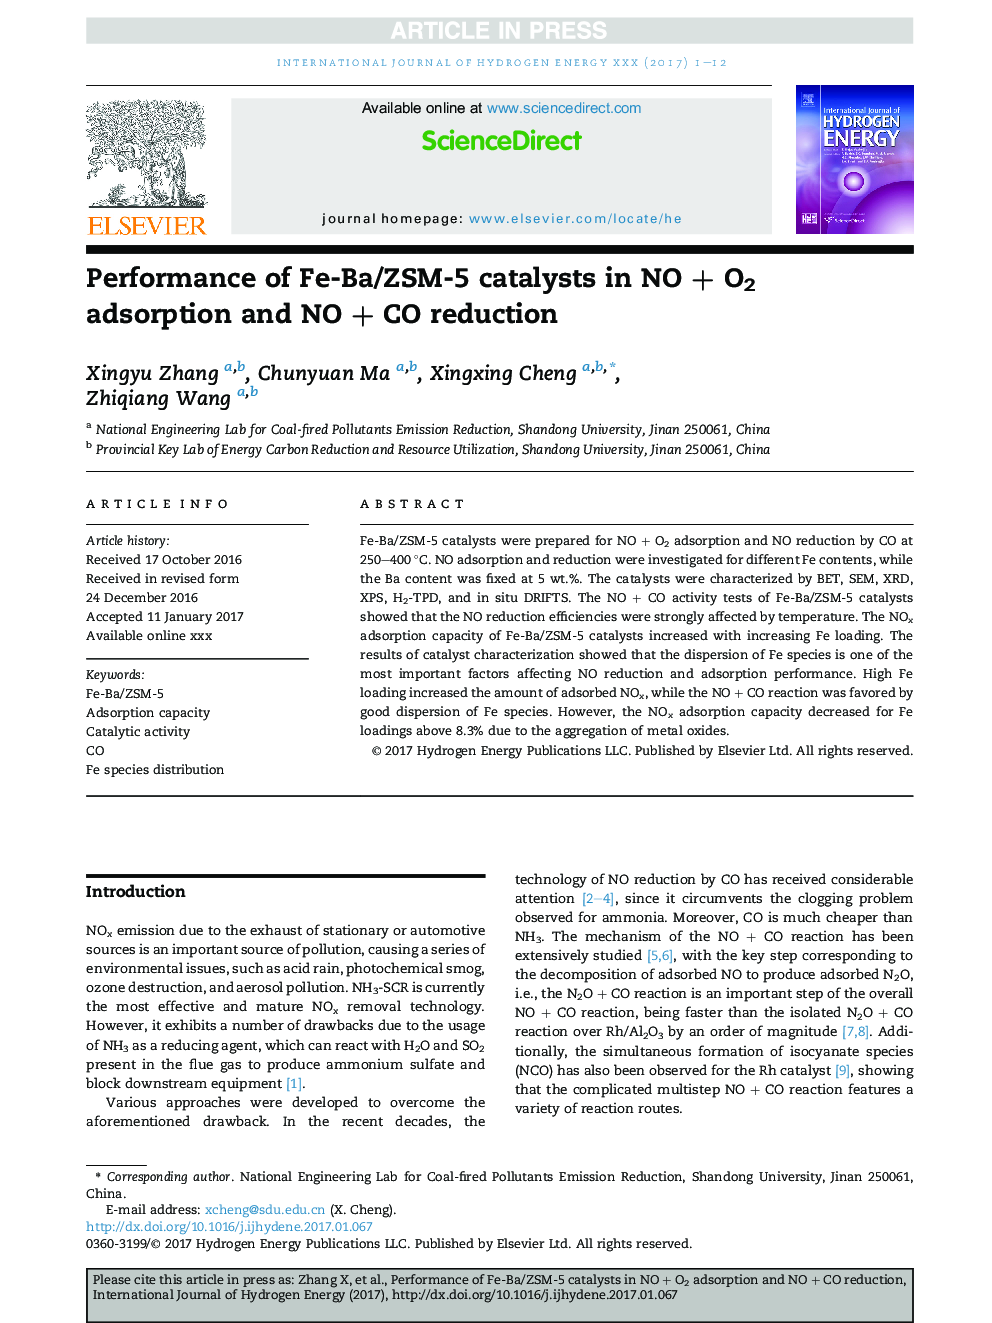 Performance of Fe-Ba/ZSM-5 catalysts in NOÂ +Â O2 adsorption and NOÂ +Â CO reduction